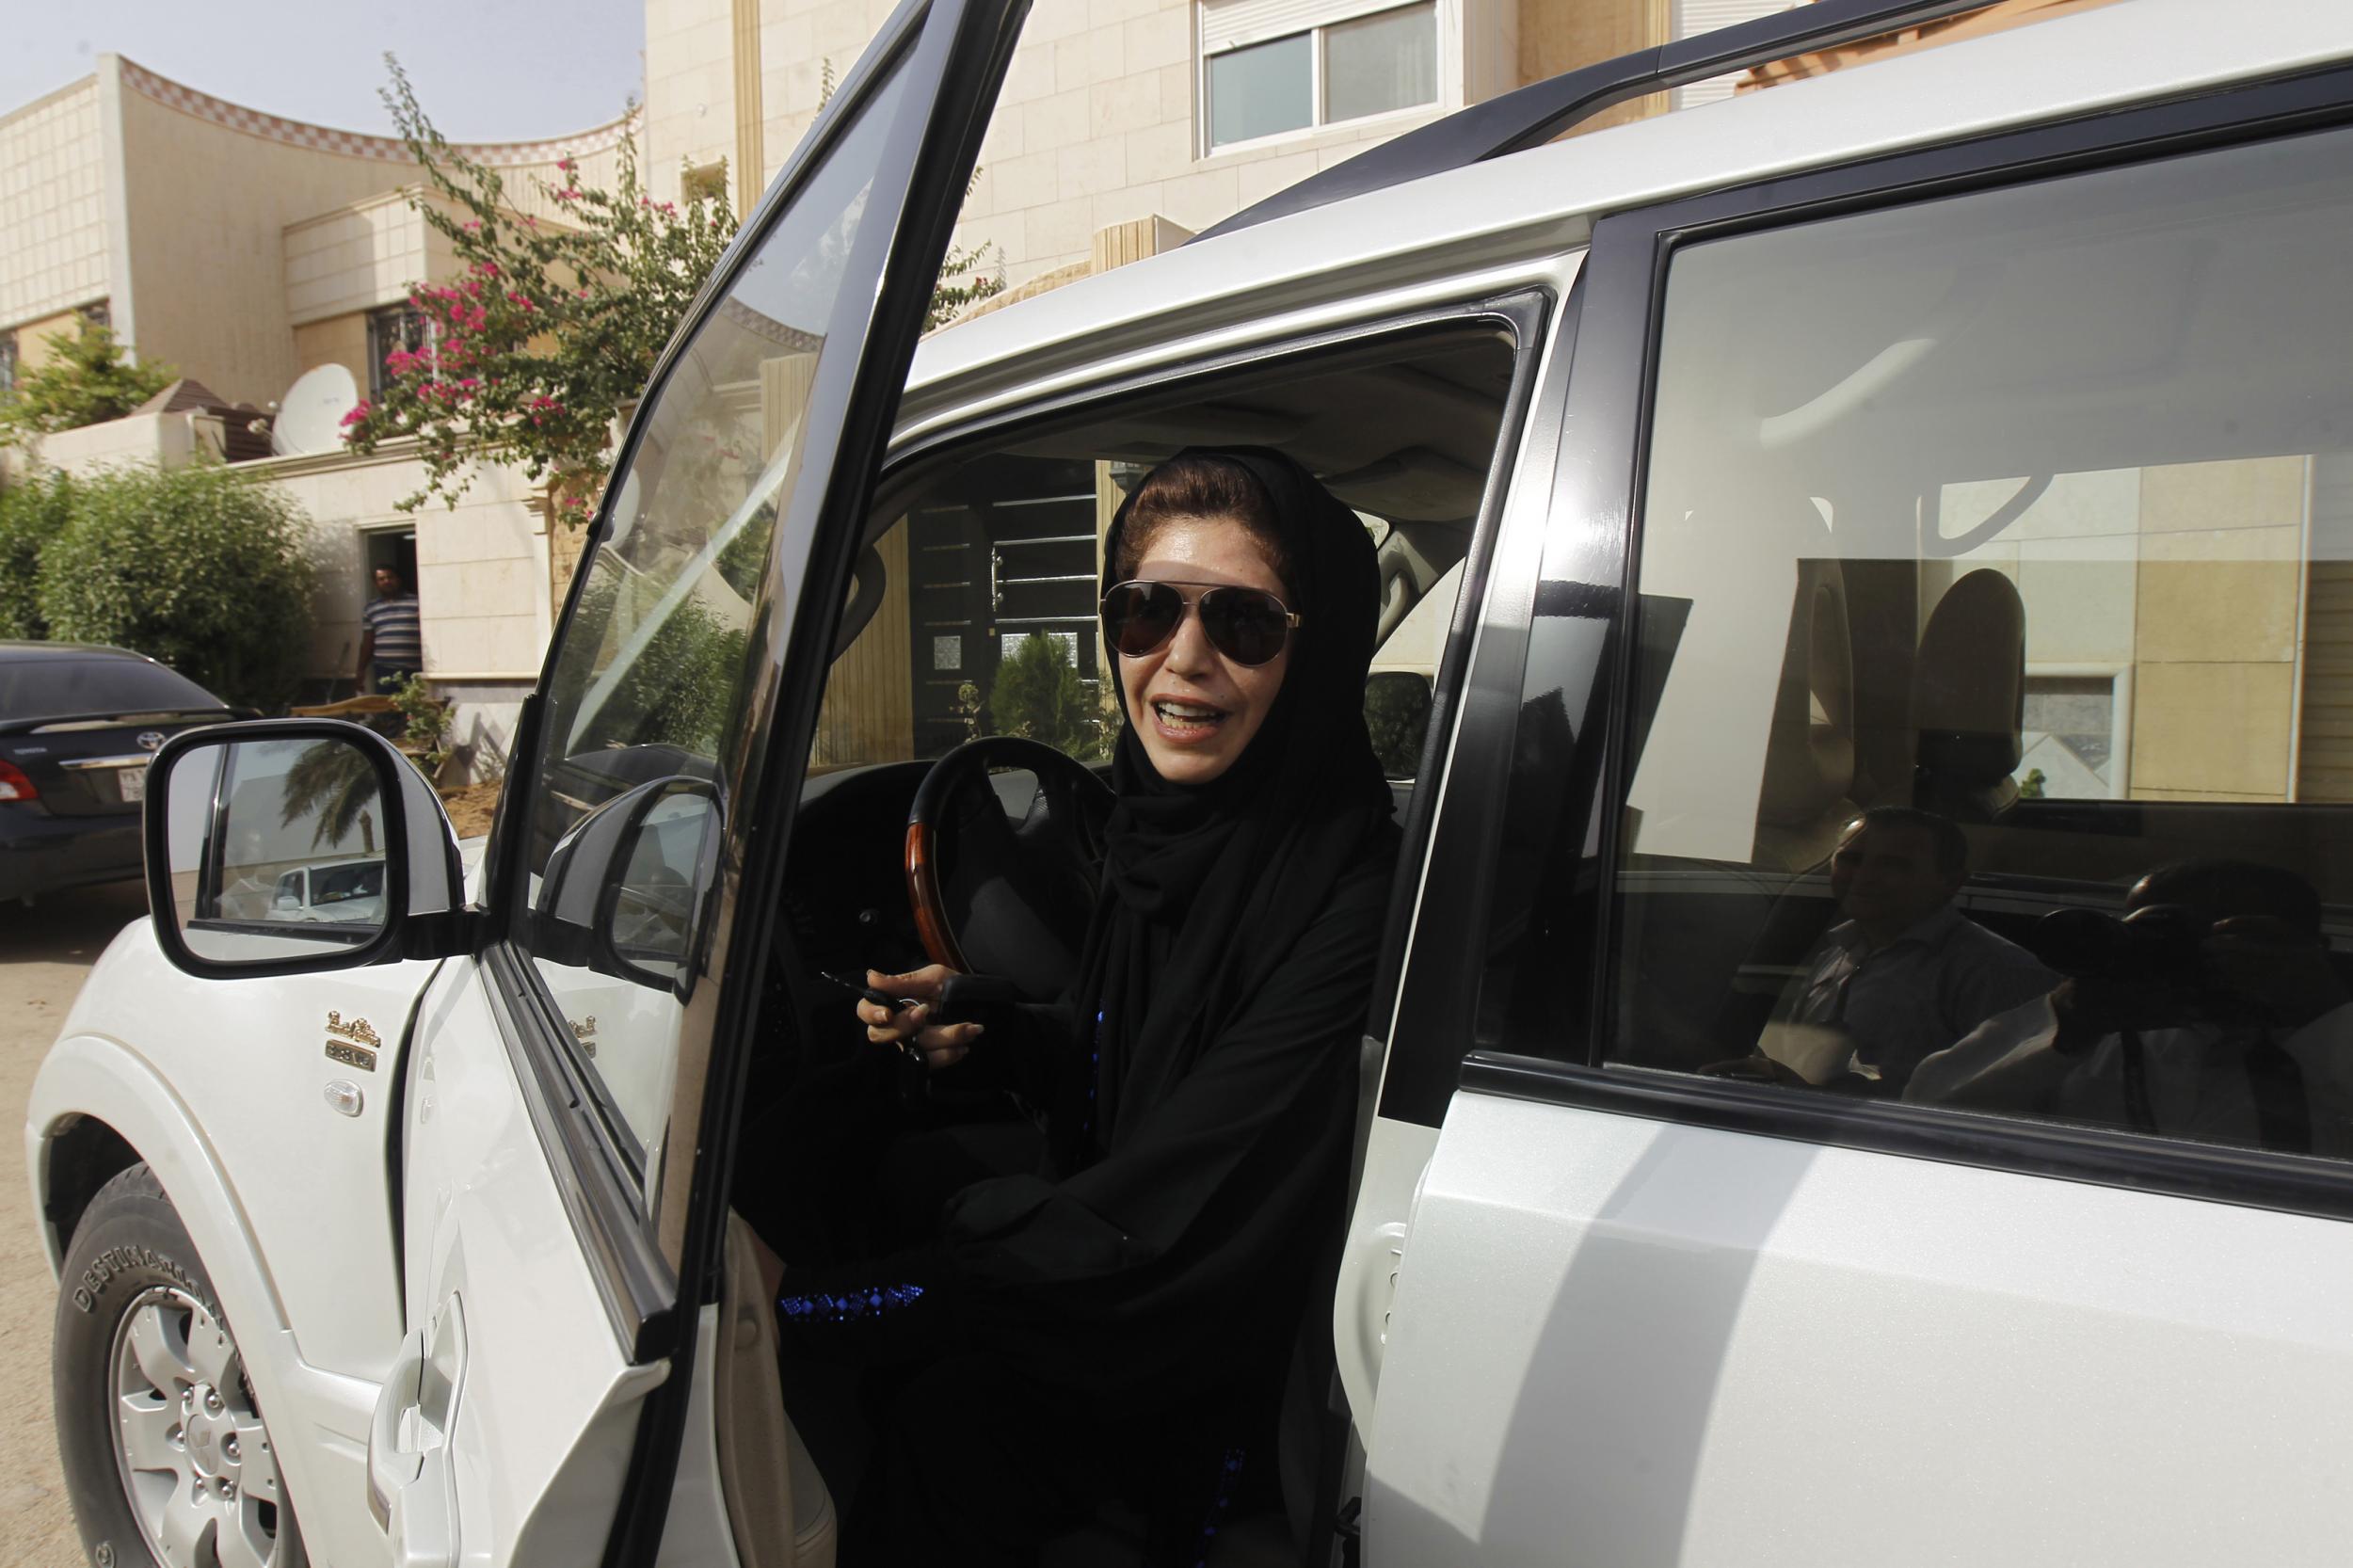 Saudi Arabia's decision to overturn a ban on women driving may boost car sales in the region